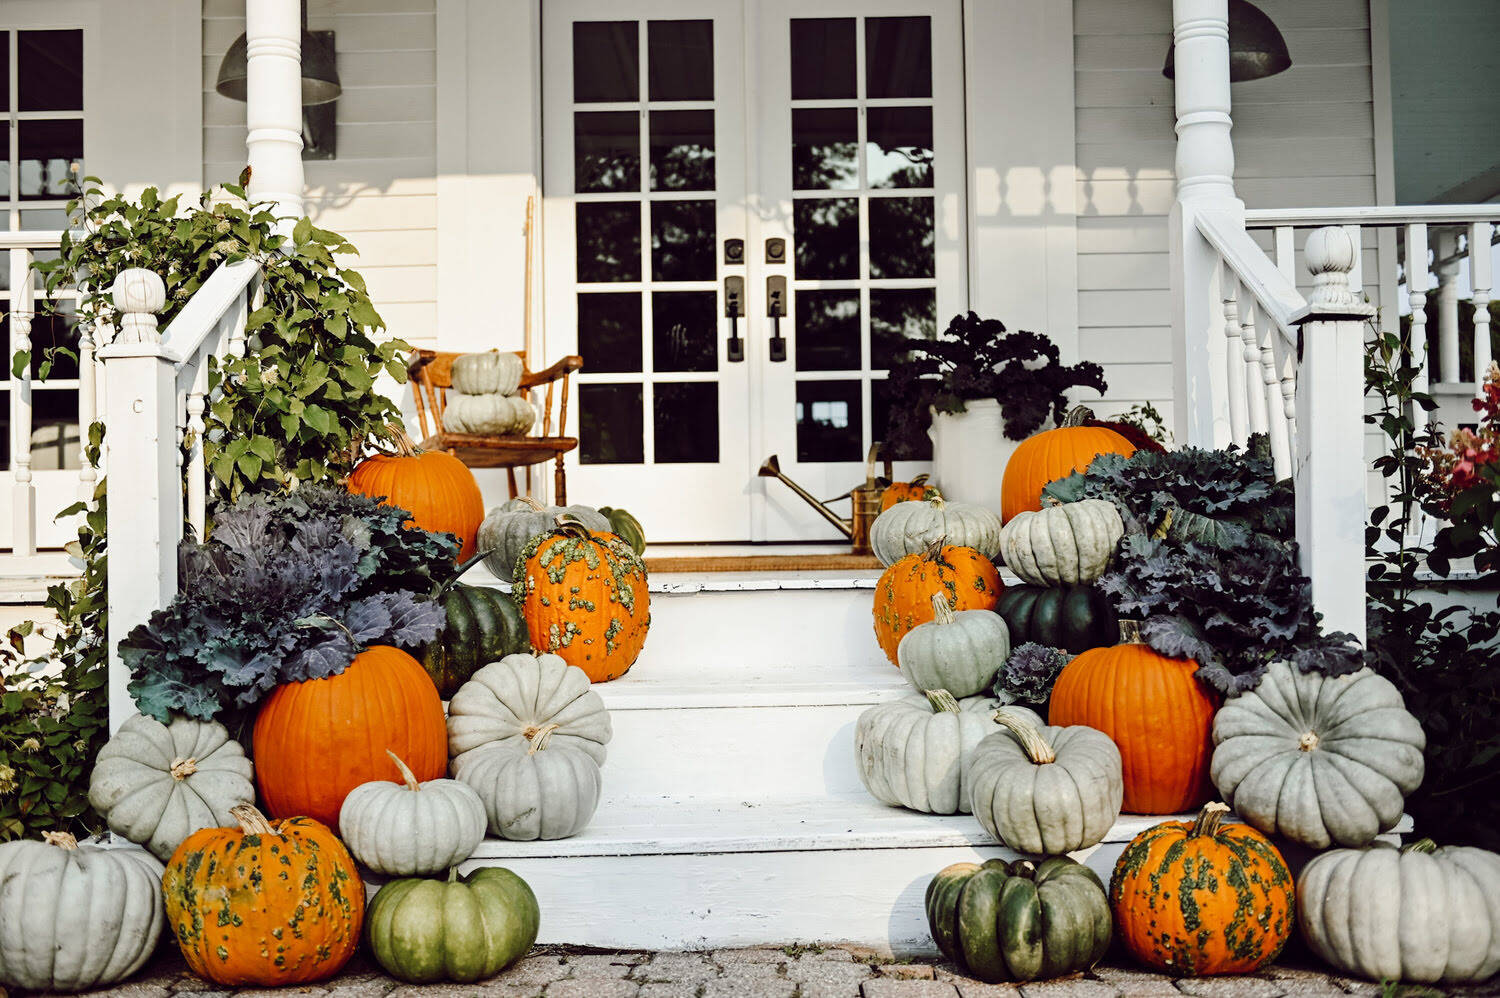 How Long Do Pumpkins Last On The Porch